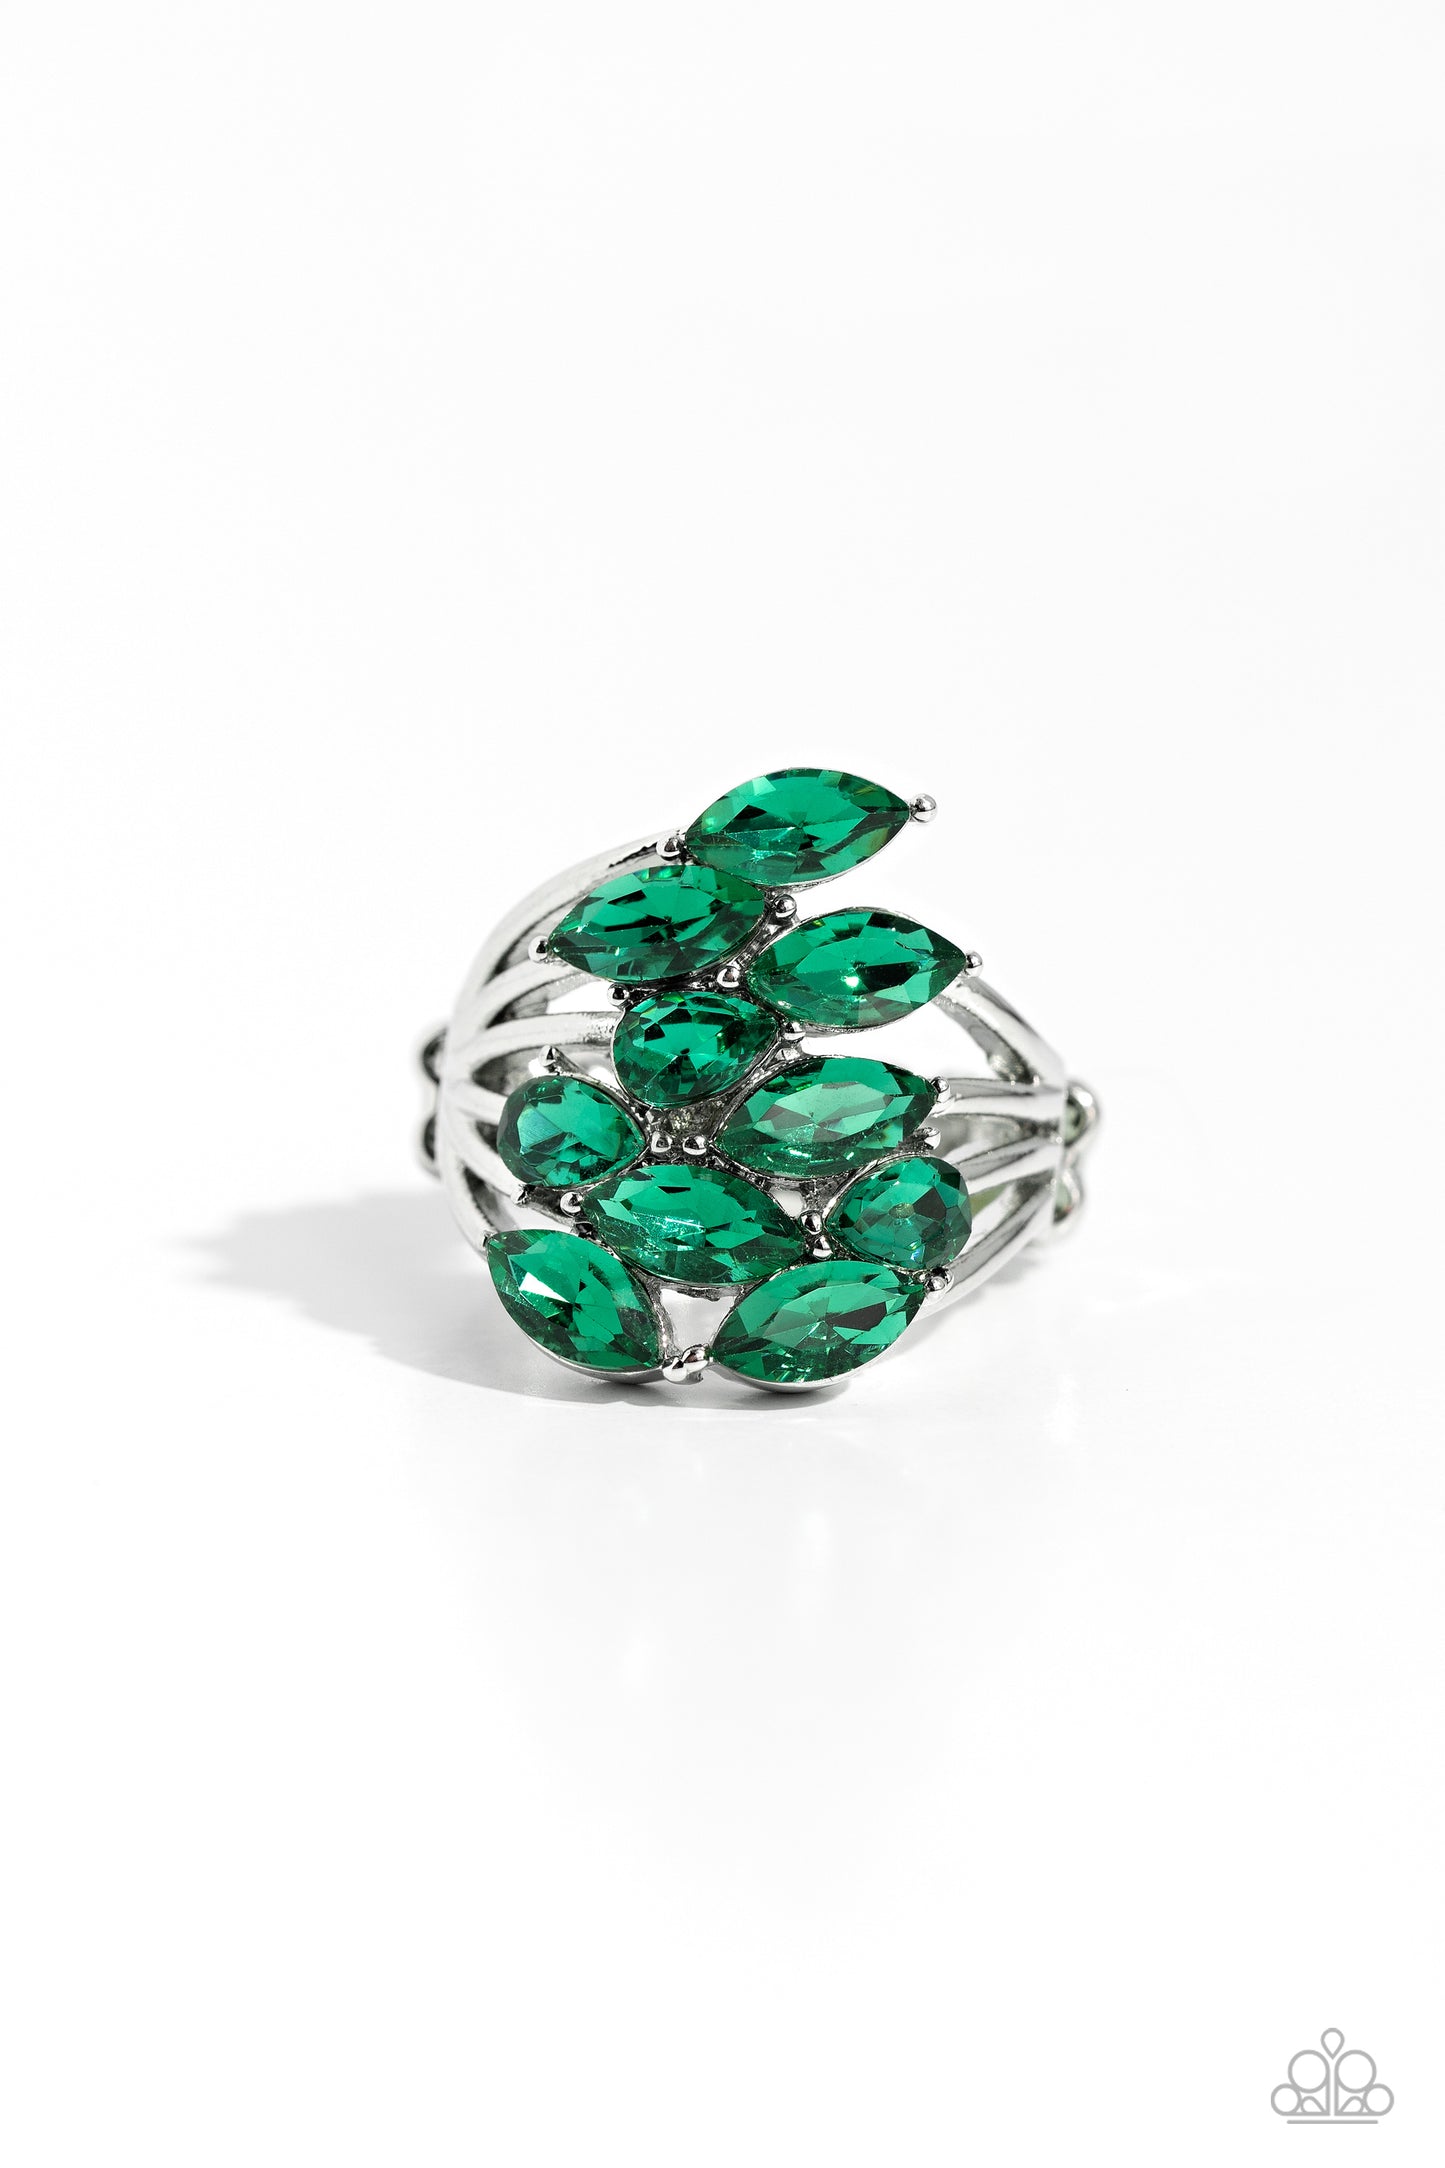 Paparazzi Rings - Wave of Whimsy - Green